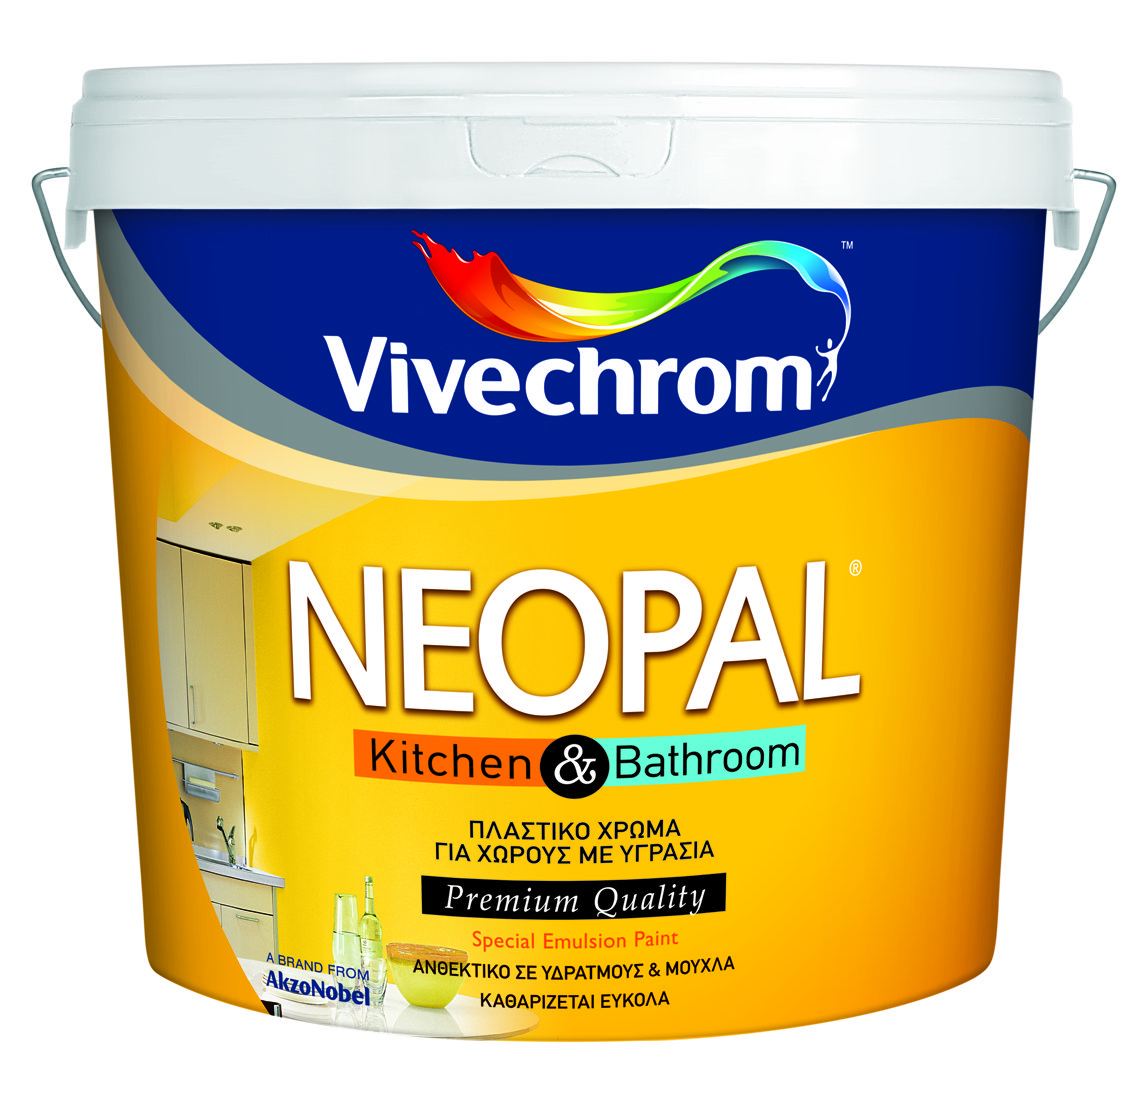 Vivechrom Neopal Kitchen & Bathroom Mixing Base P 1L